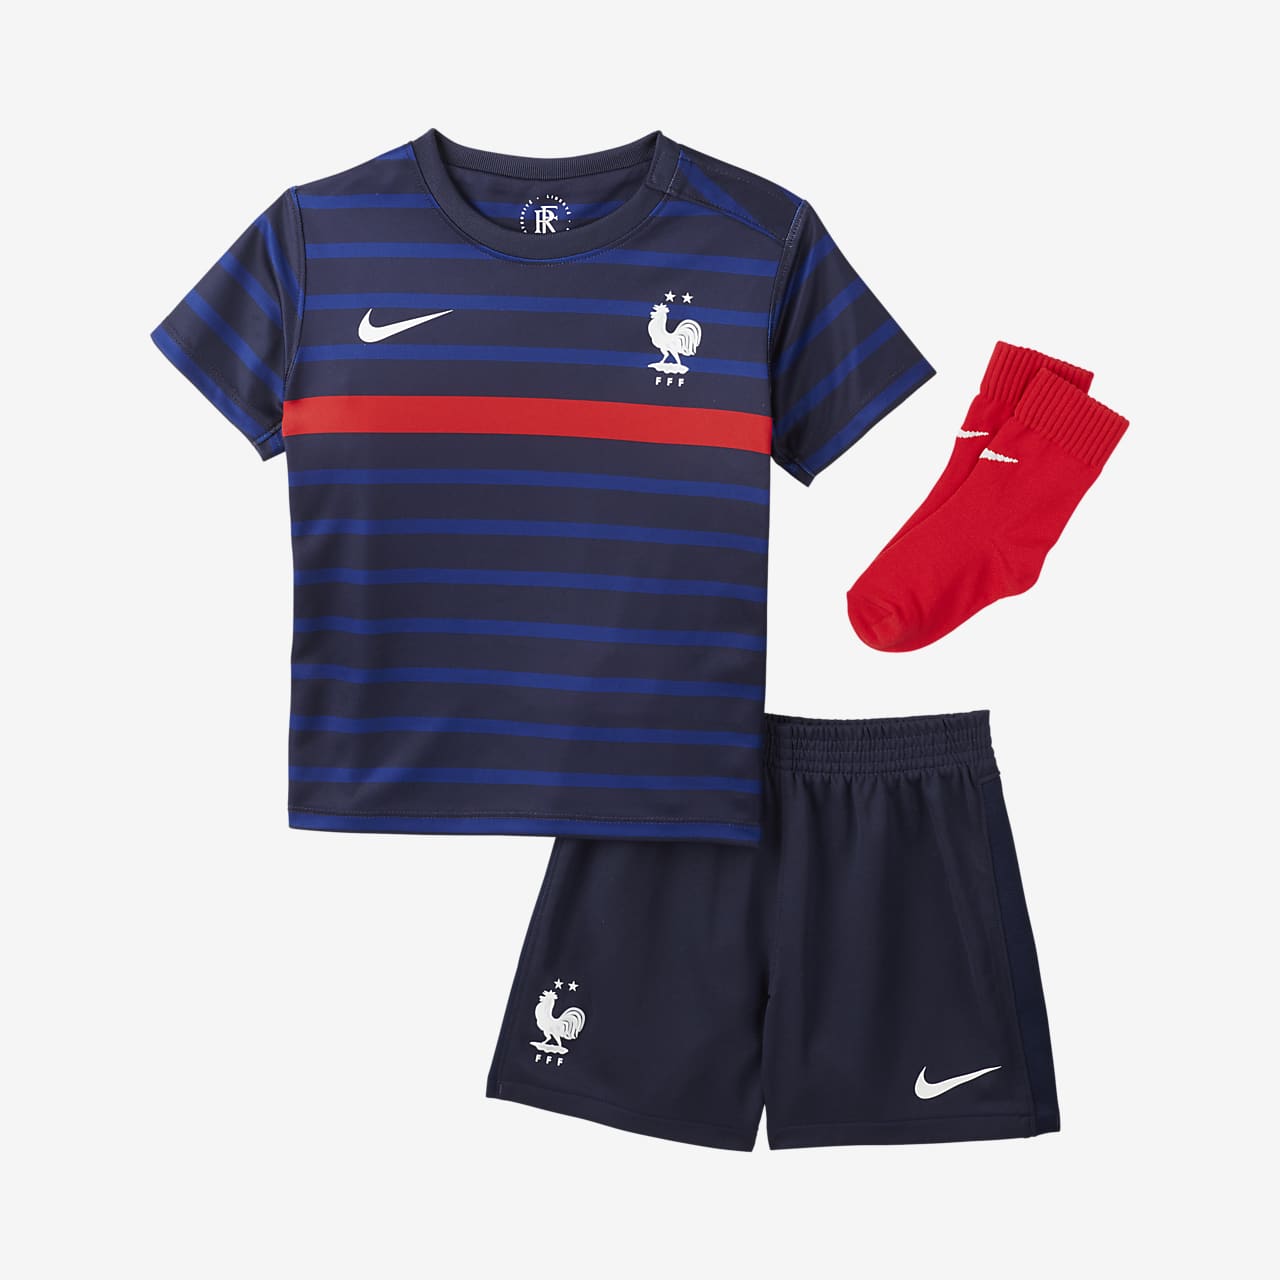 FFF 2020 Home Baby and Toddler Football Kit